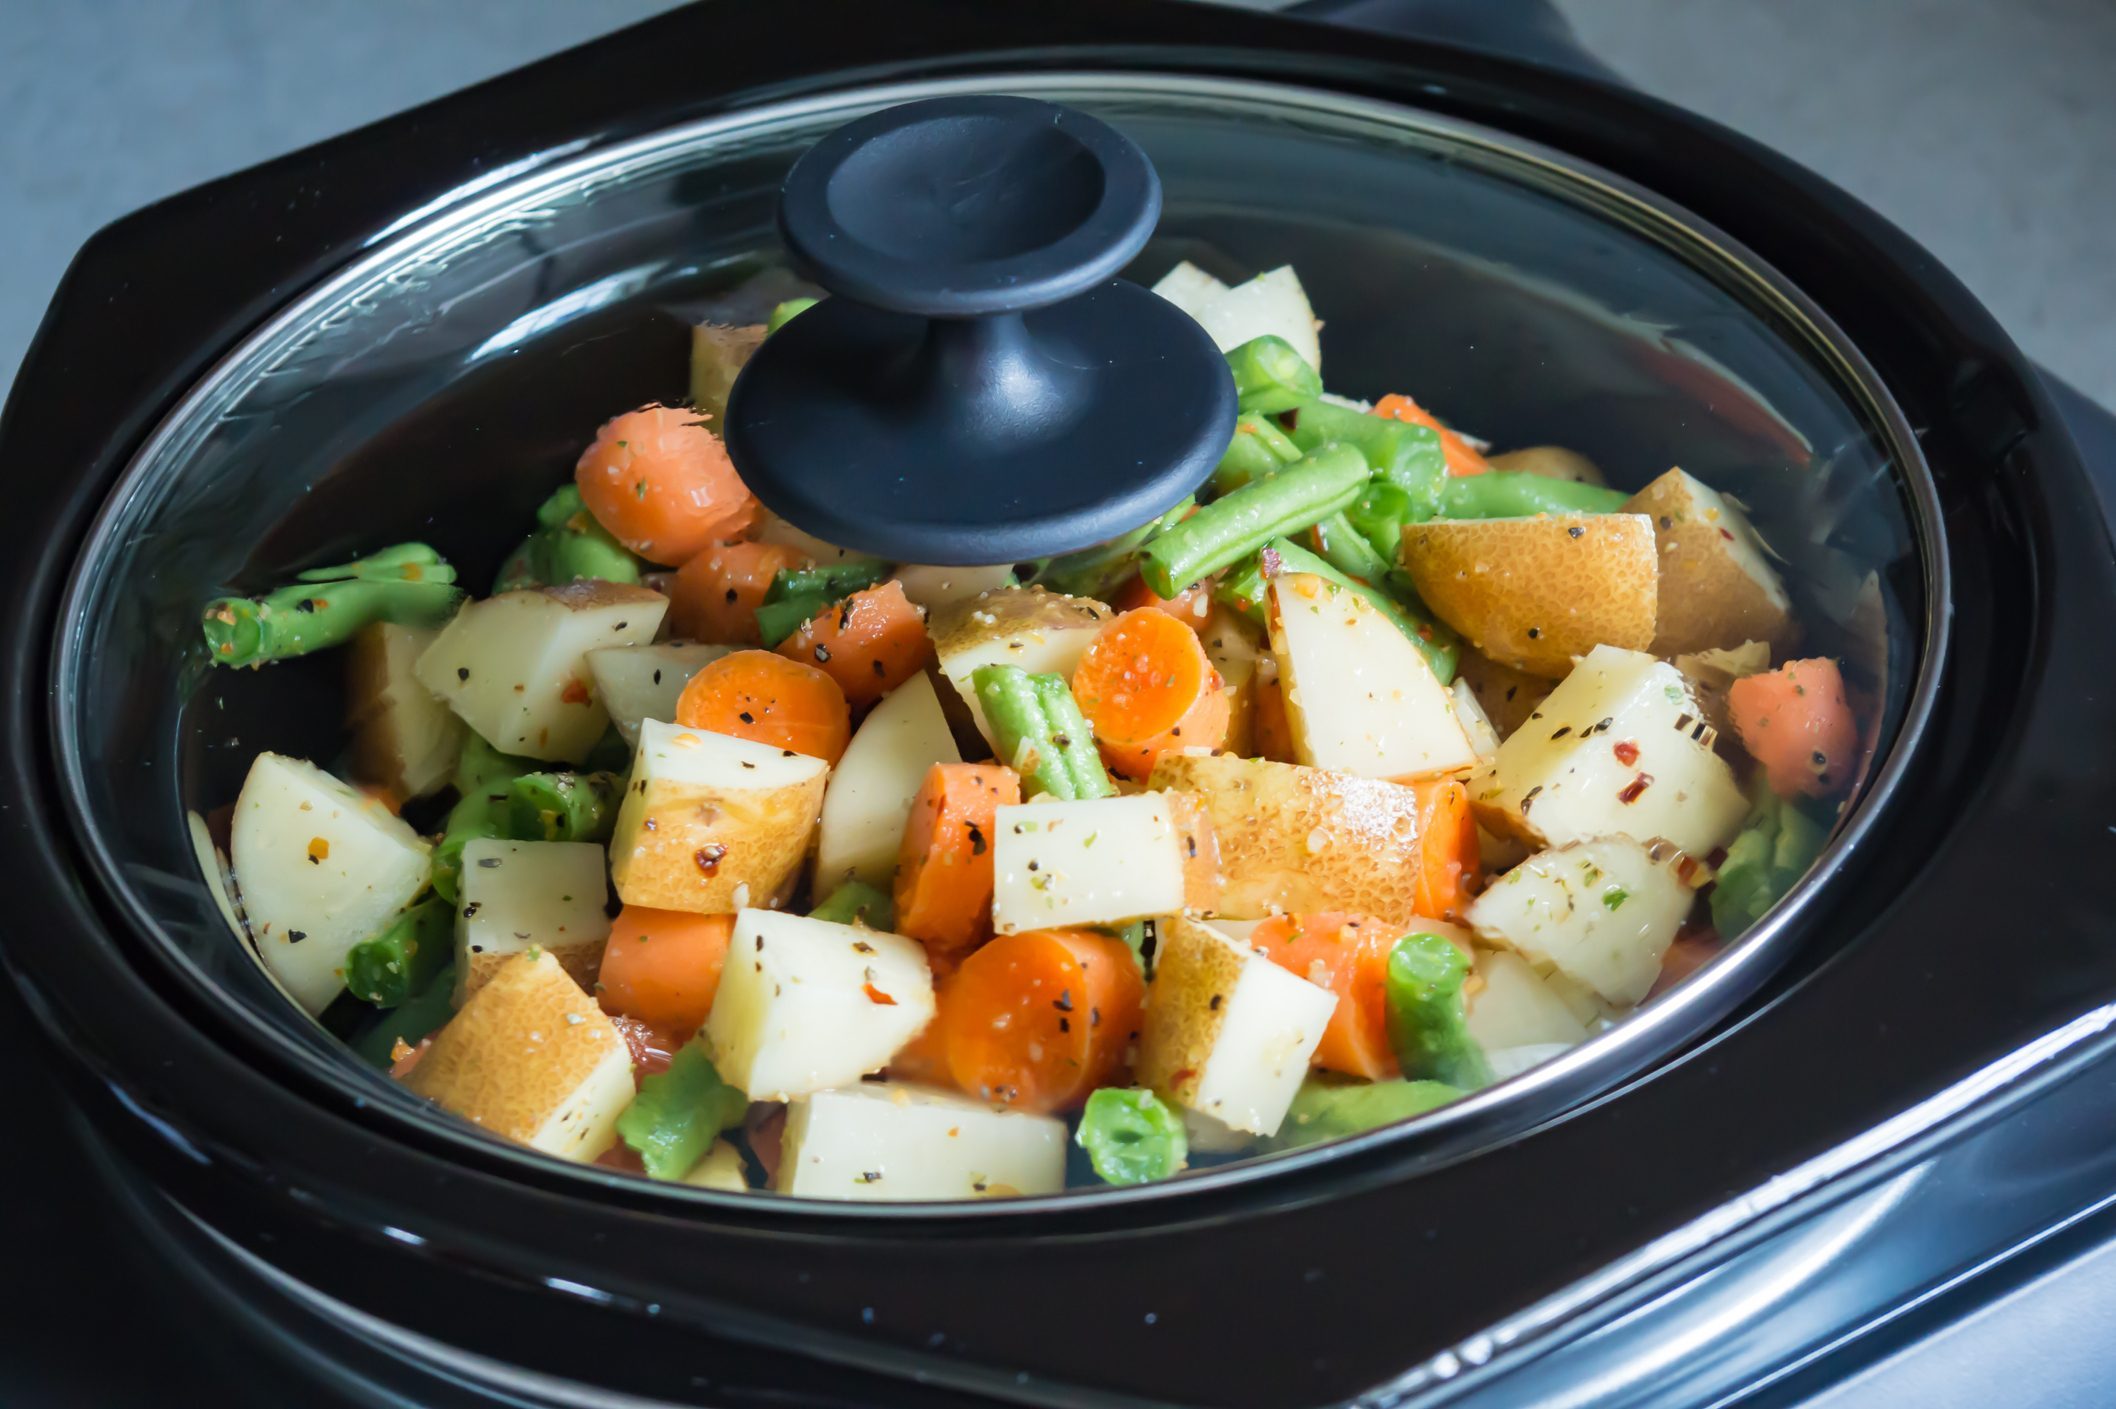 How To Convert Instant Pot Recipes To Crockpot or Slow Cooker